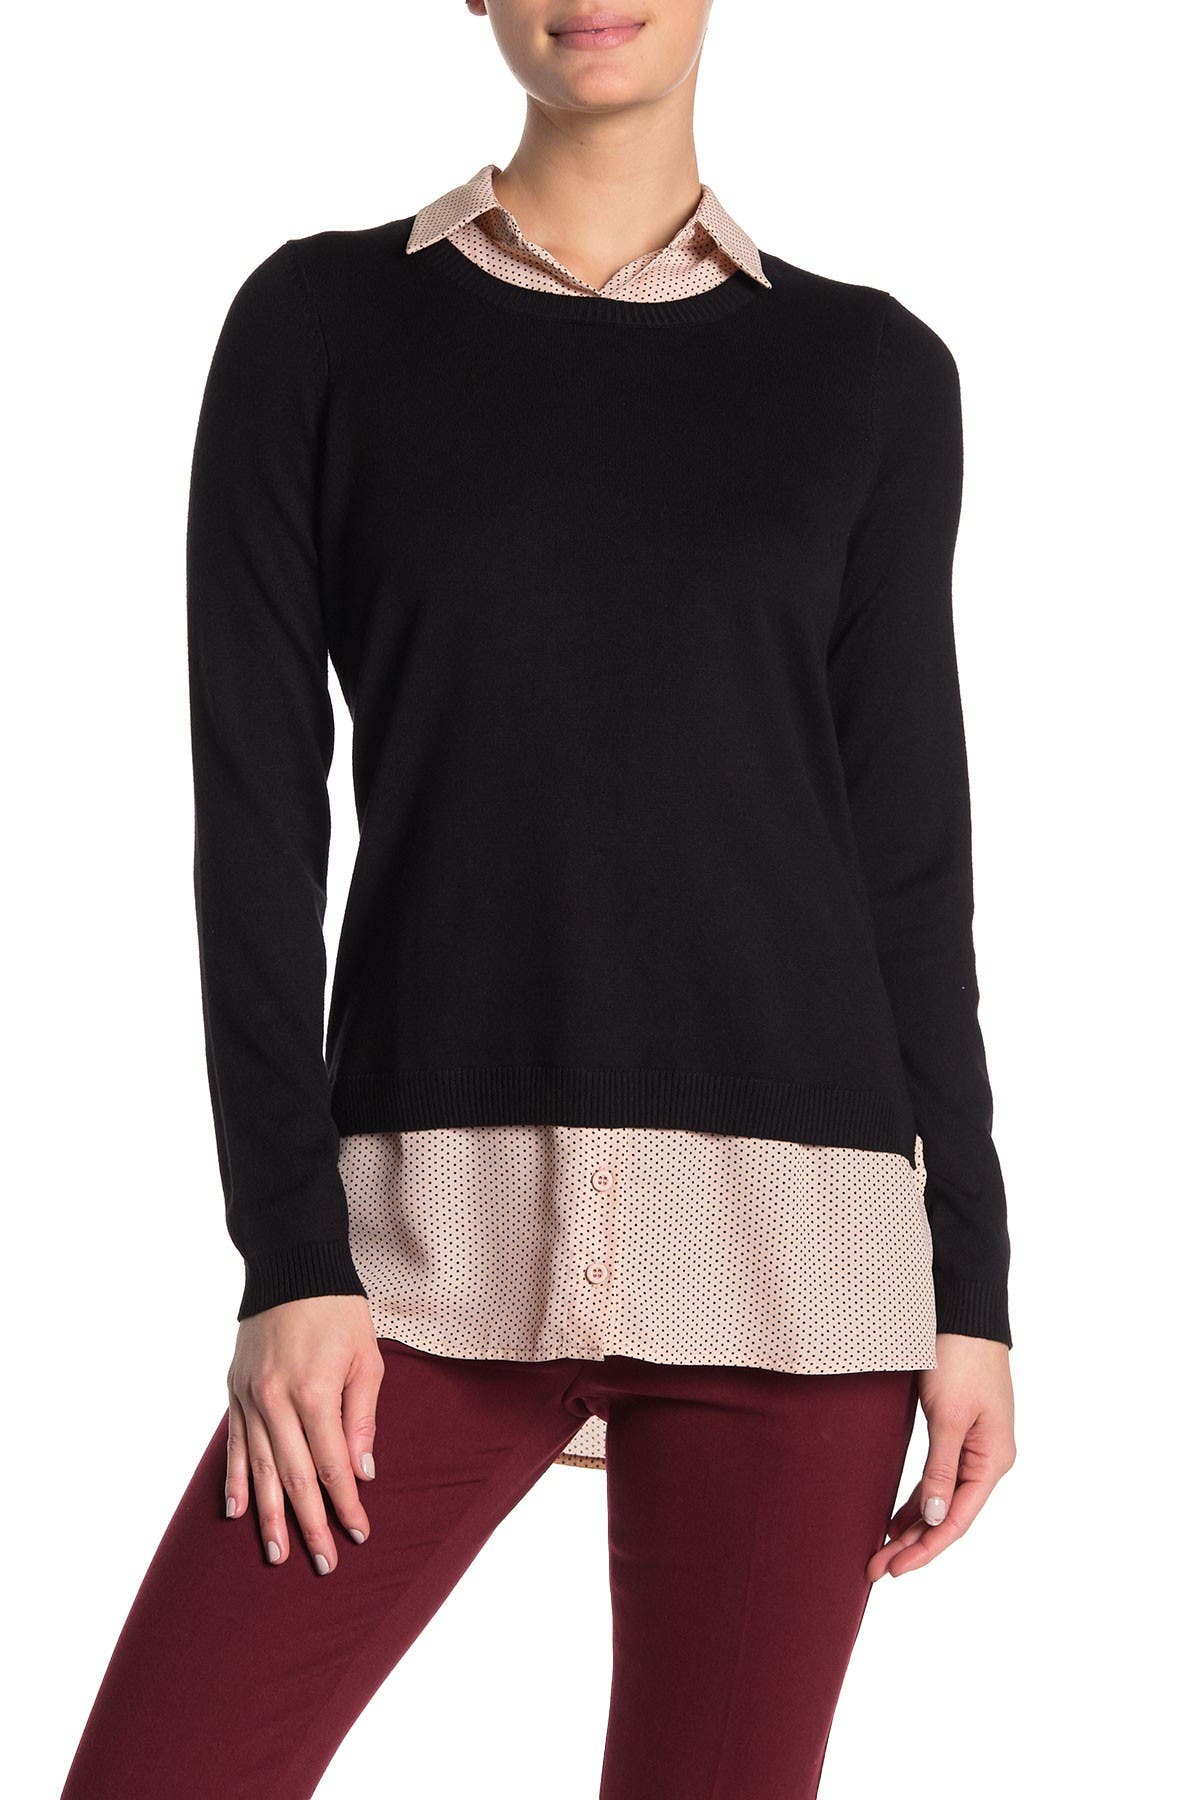 Adrianna Papell | Shirttail Twofer Sweater | Nordstrom Rack